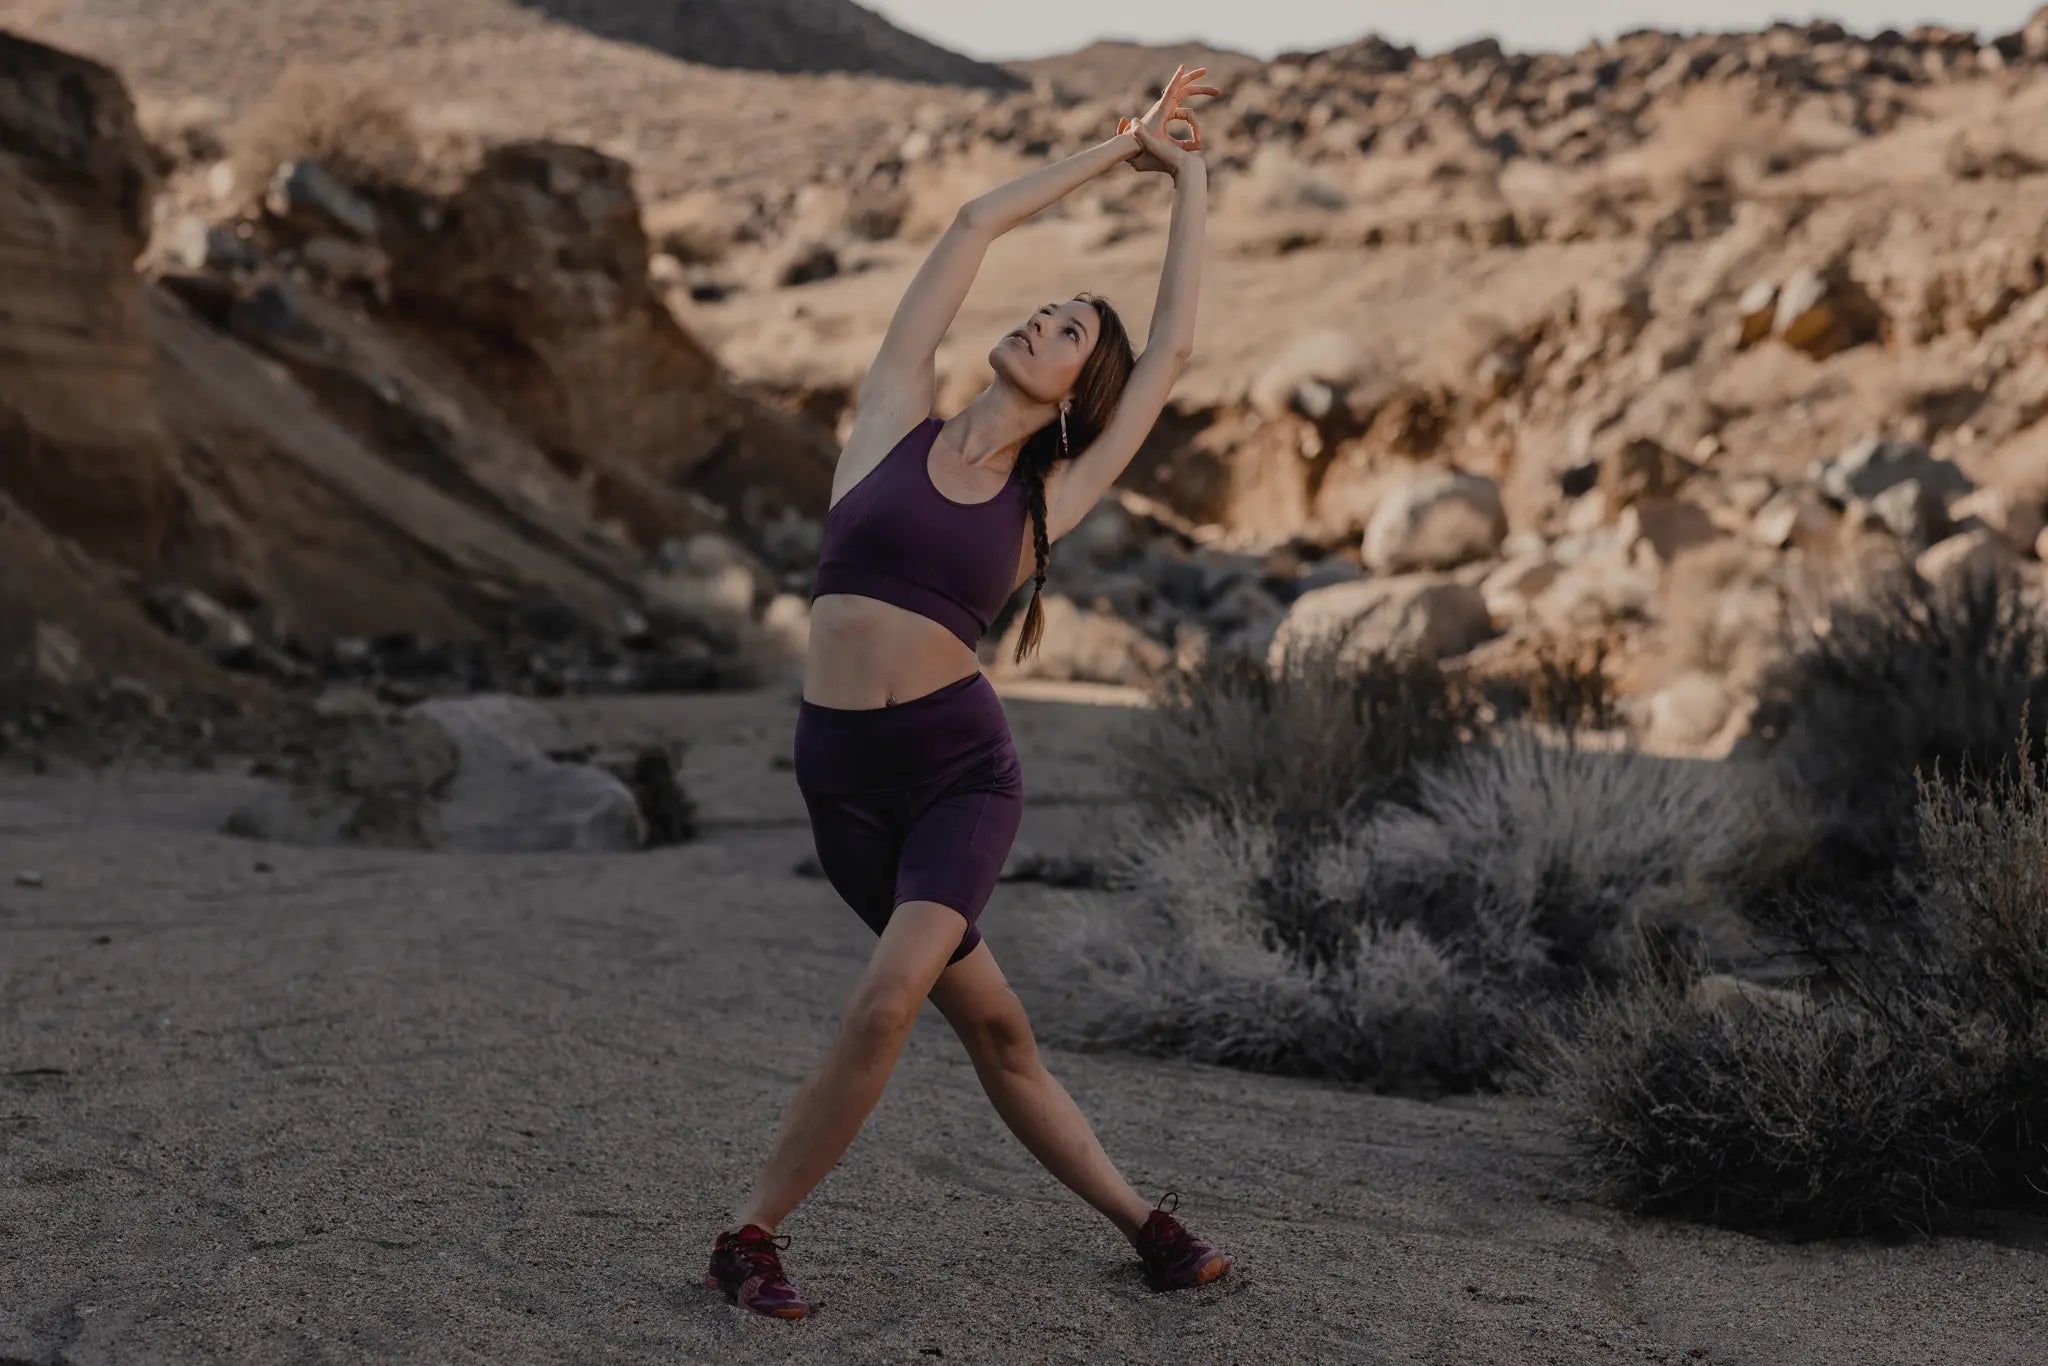 a woman does a yoga pose in the desert wearing matching Ridge Merino shorts and sports bra